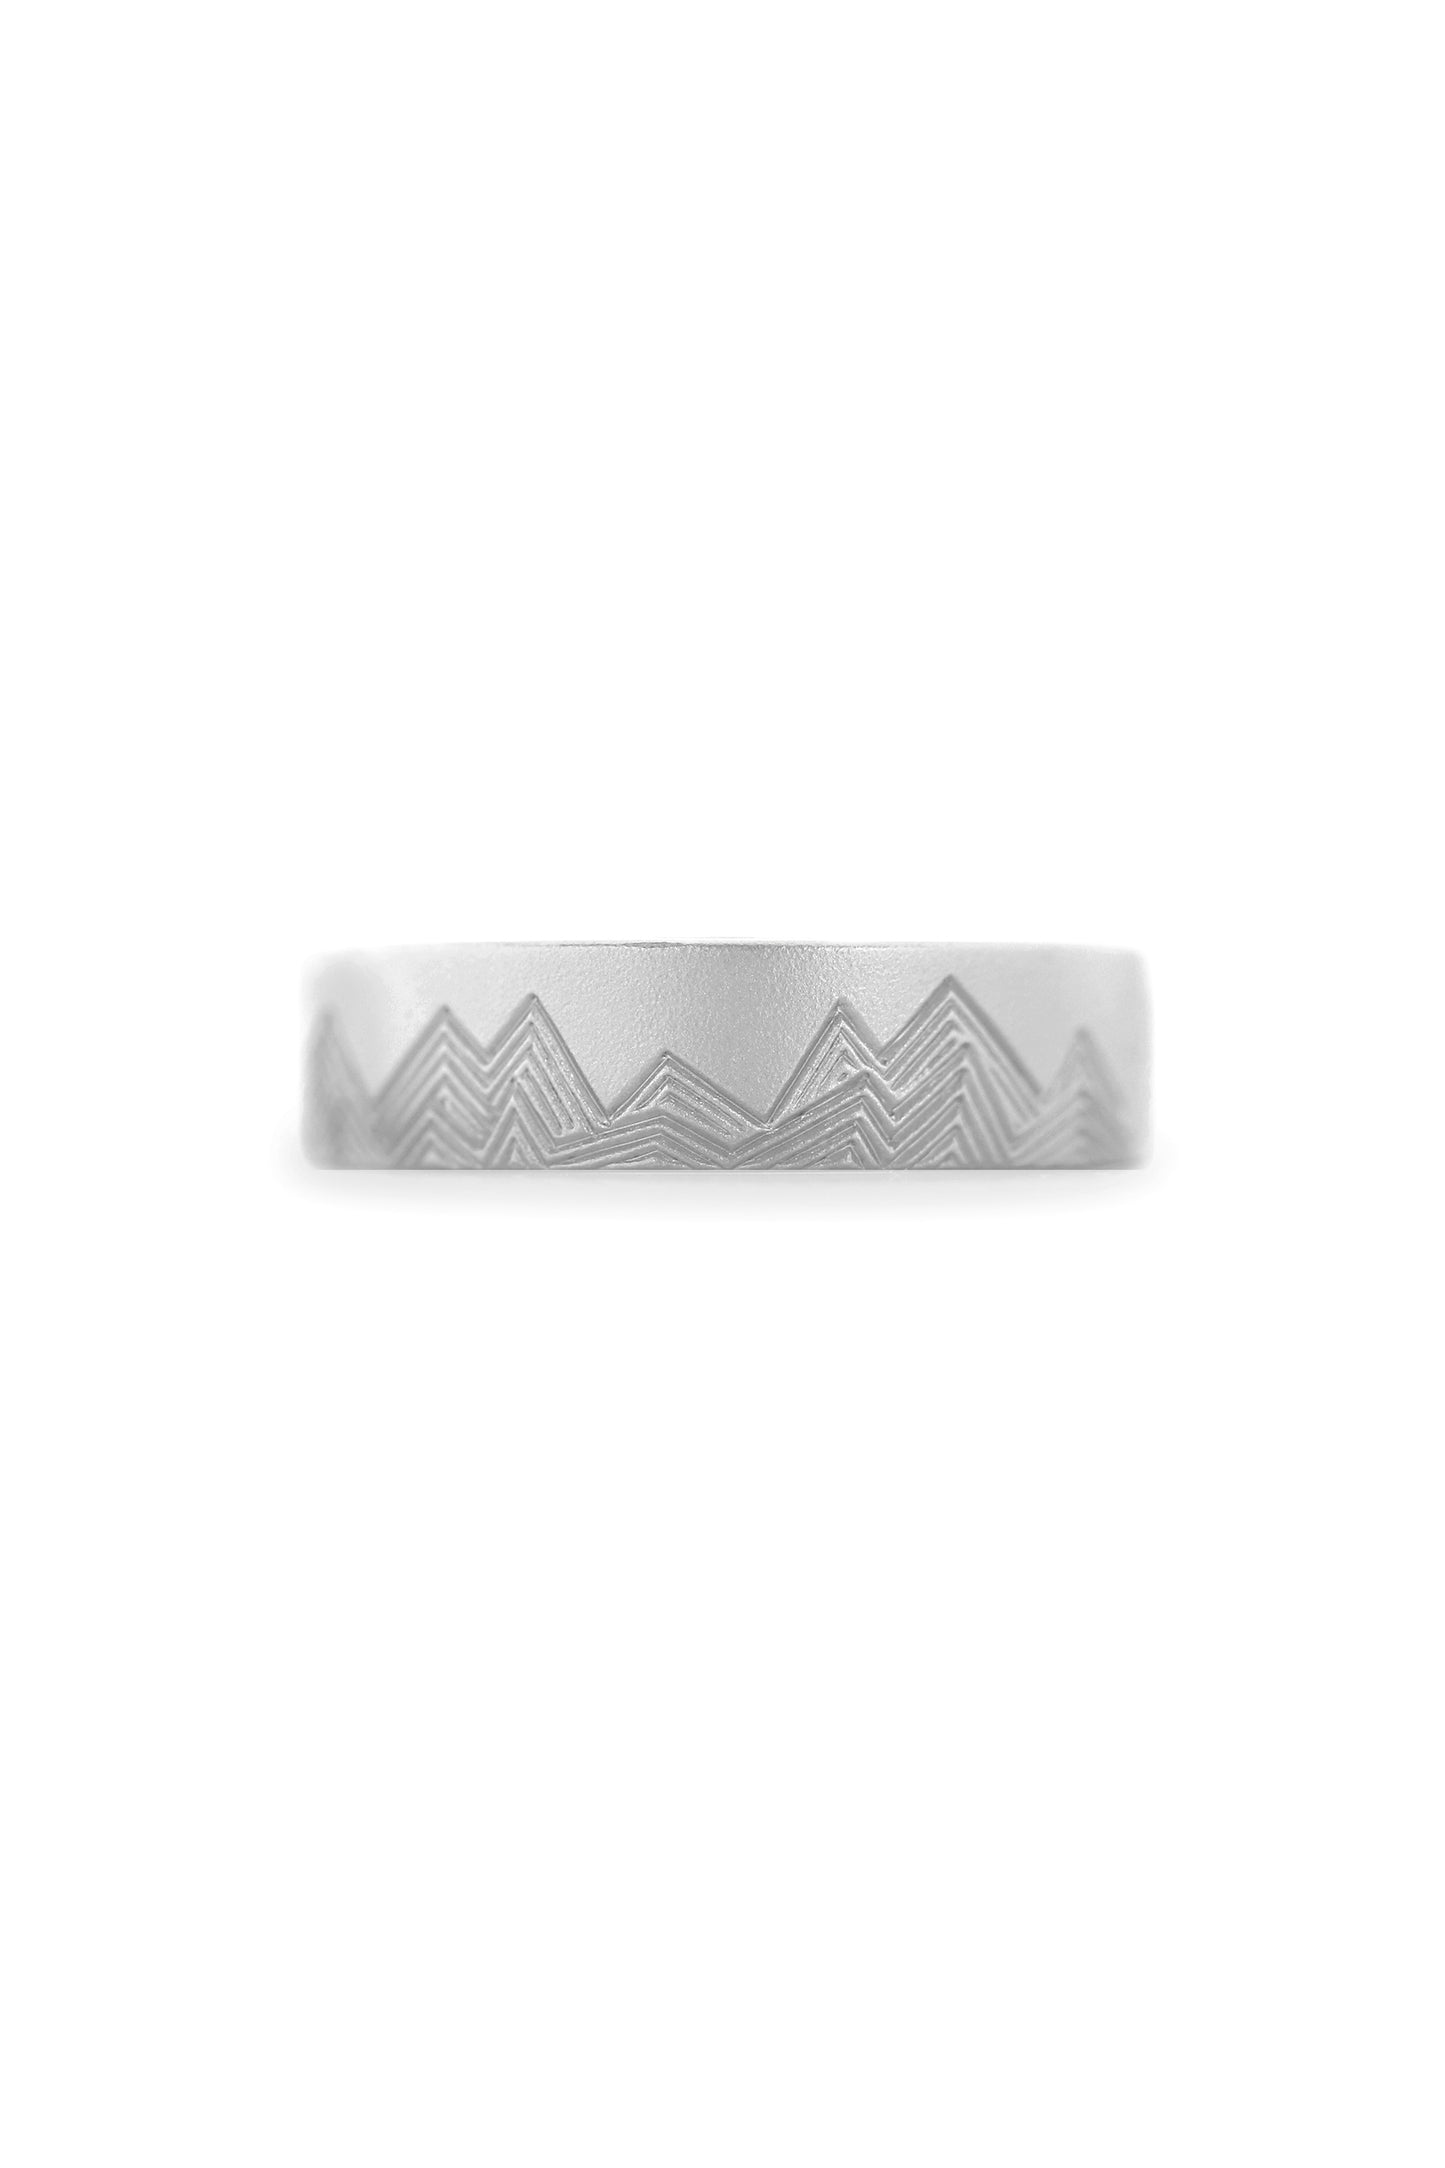 Elevation Mountains Engraved Band